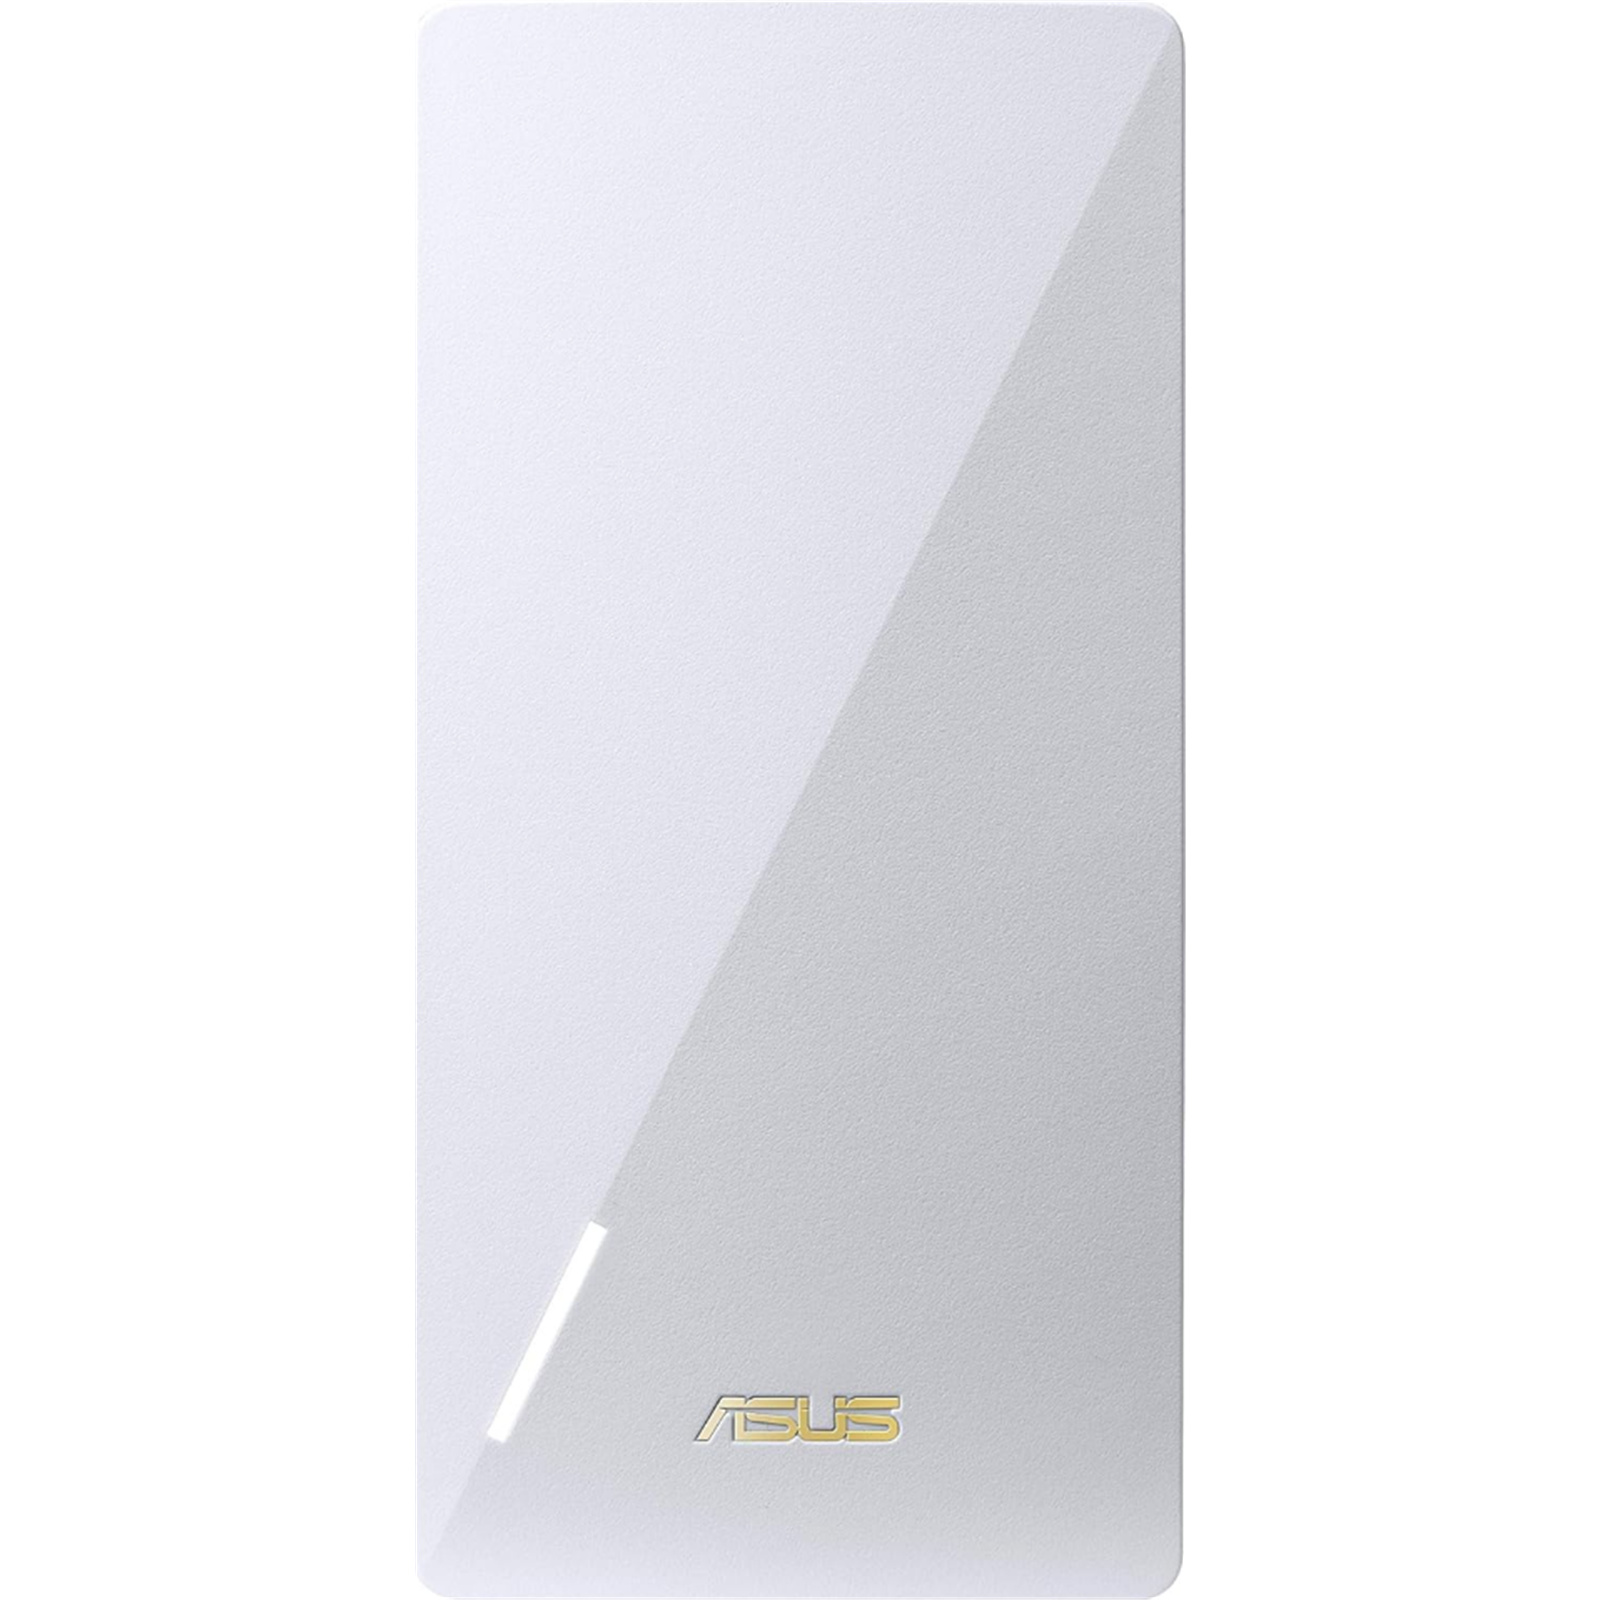 Buy the ASUS RP-AX56 Dual-Band AX1800 WIFI Range Extender ( RP-AX56 )  online - PBTech.com